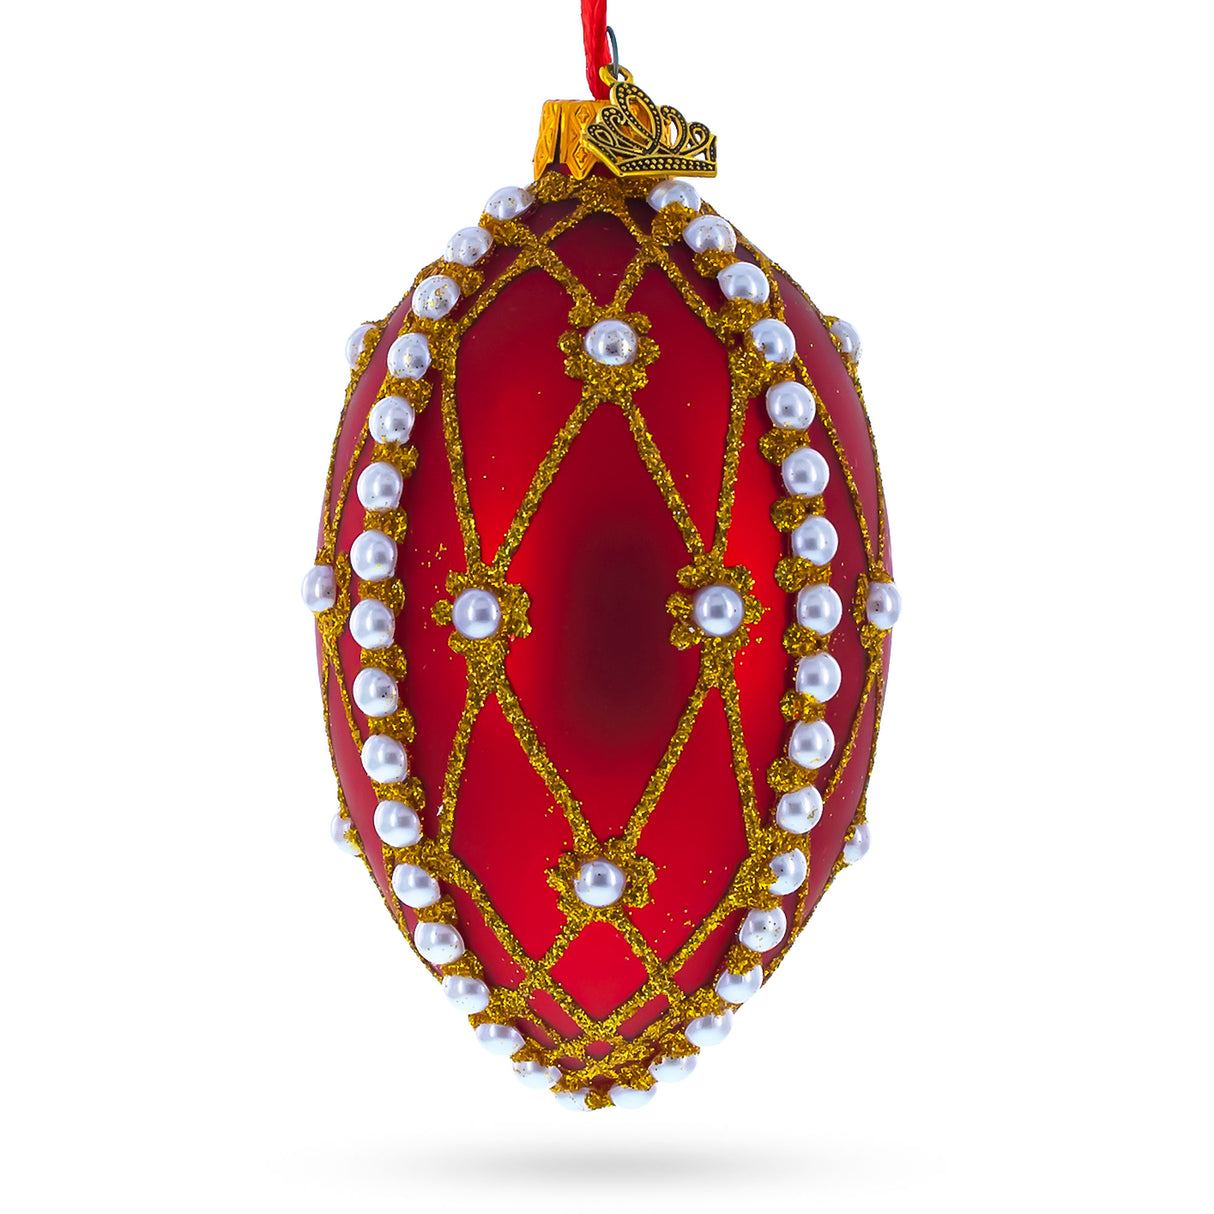 Glass White Pearl Trellis On Red Glass Egg Christmas Ornament 4 Inches in Red color Oval